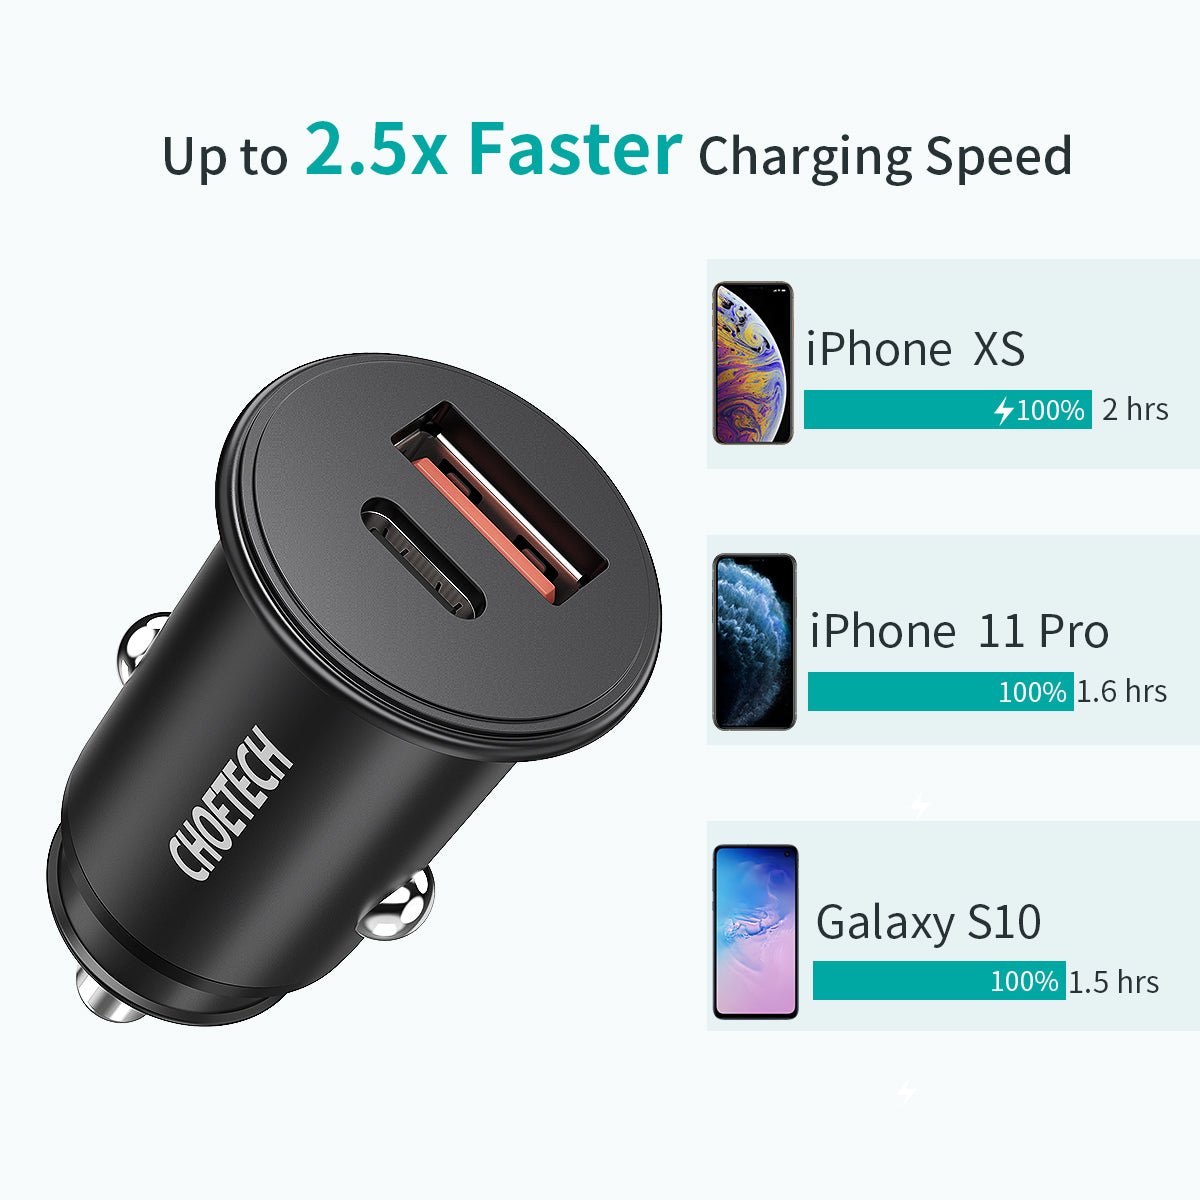 CHOETECH Dual Port 30W USB-C USB Car Charger Type-C Power Delivery Quick Charge